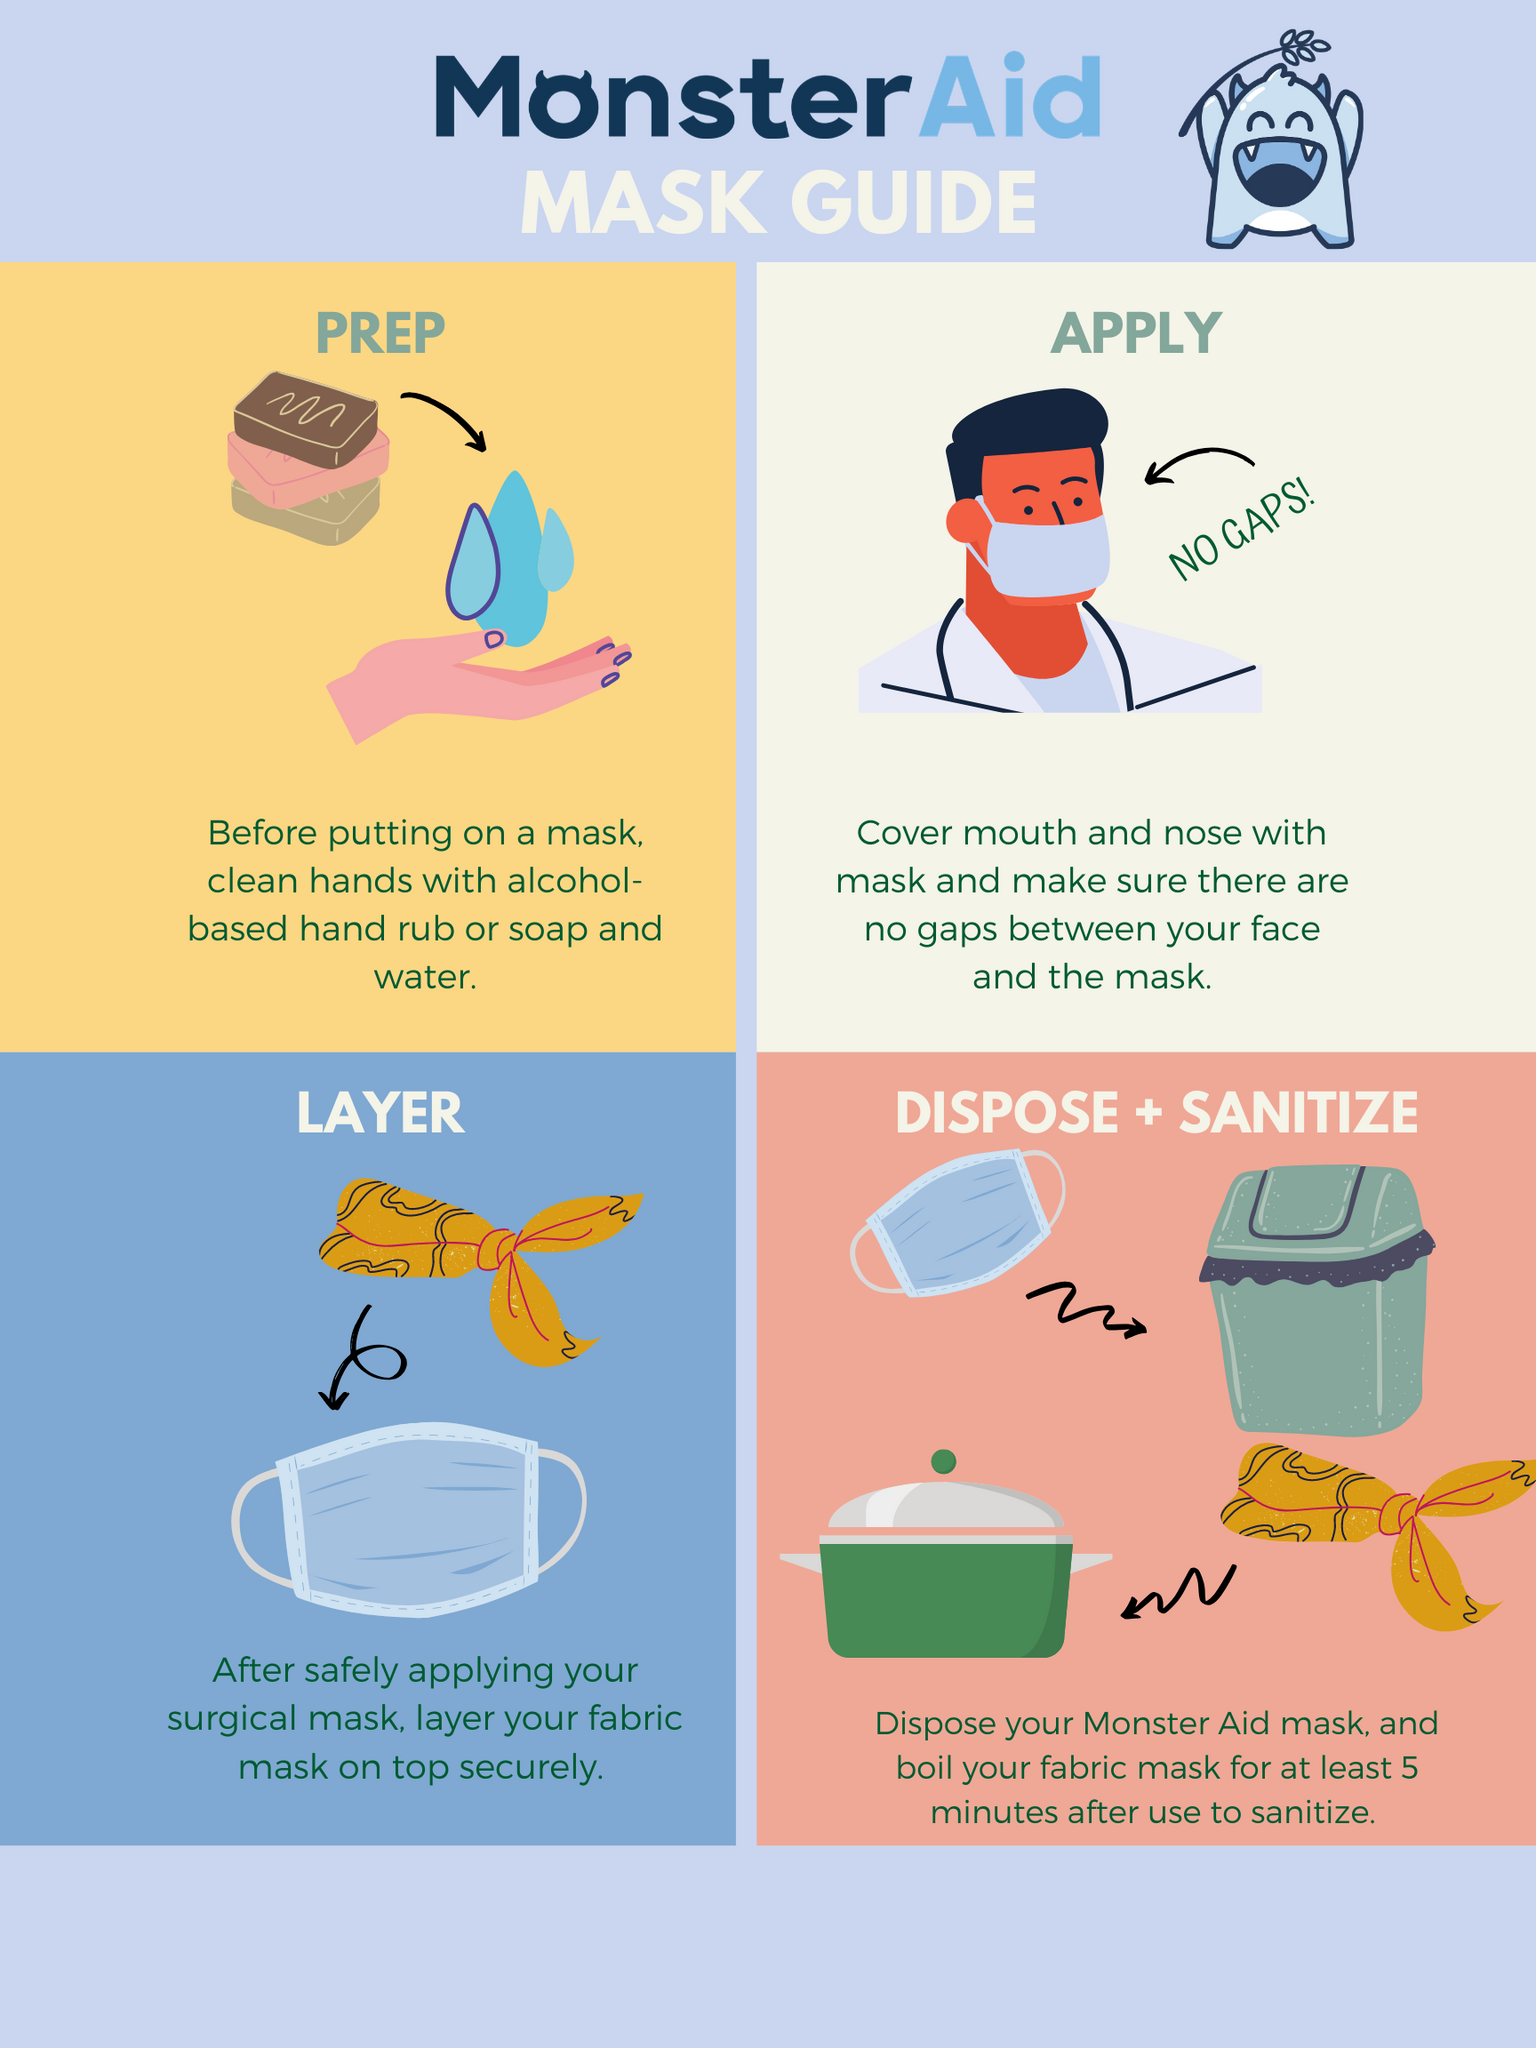 Why You Should Wear A Cloth Mask Over Your Surgical Mask